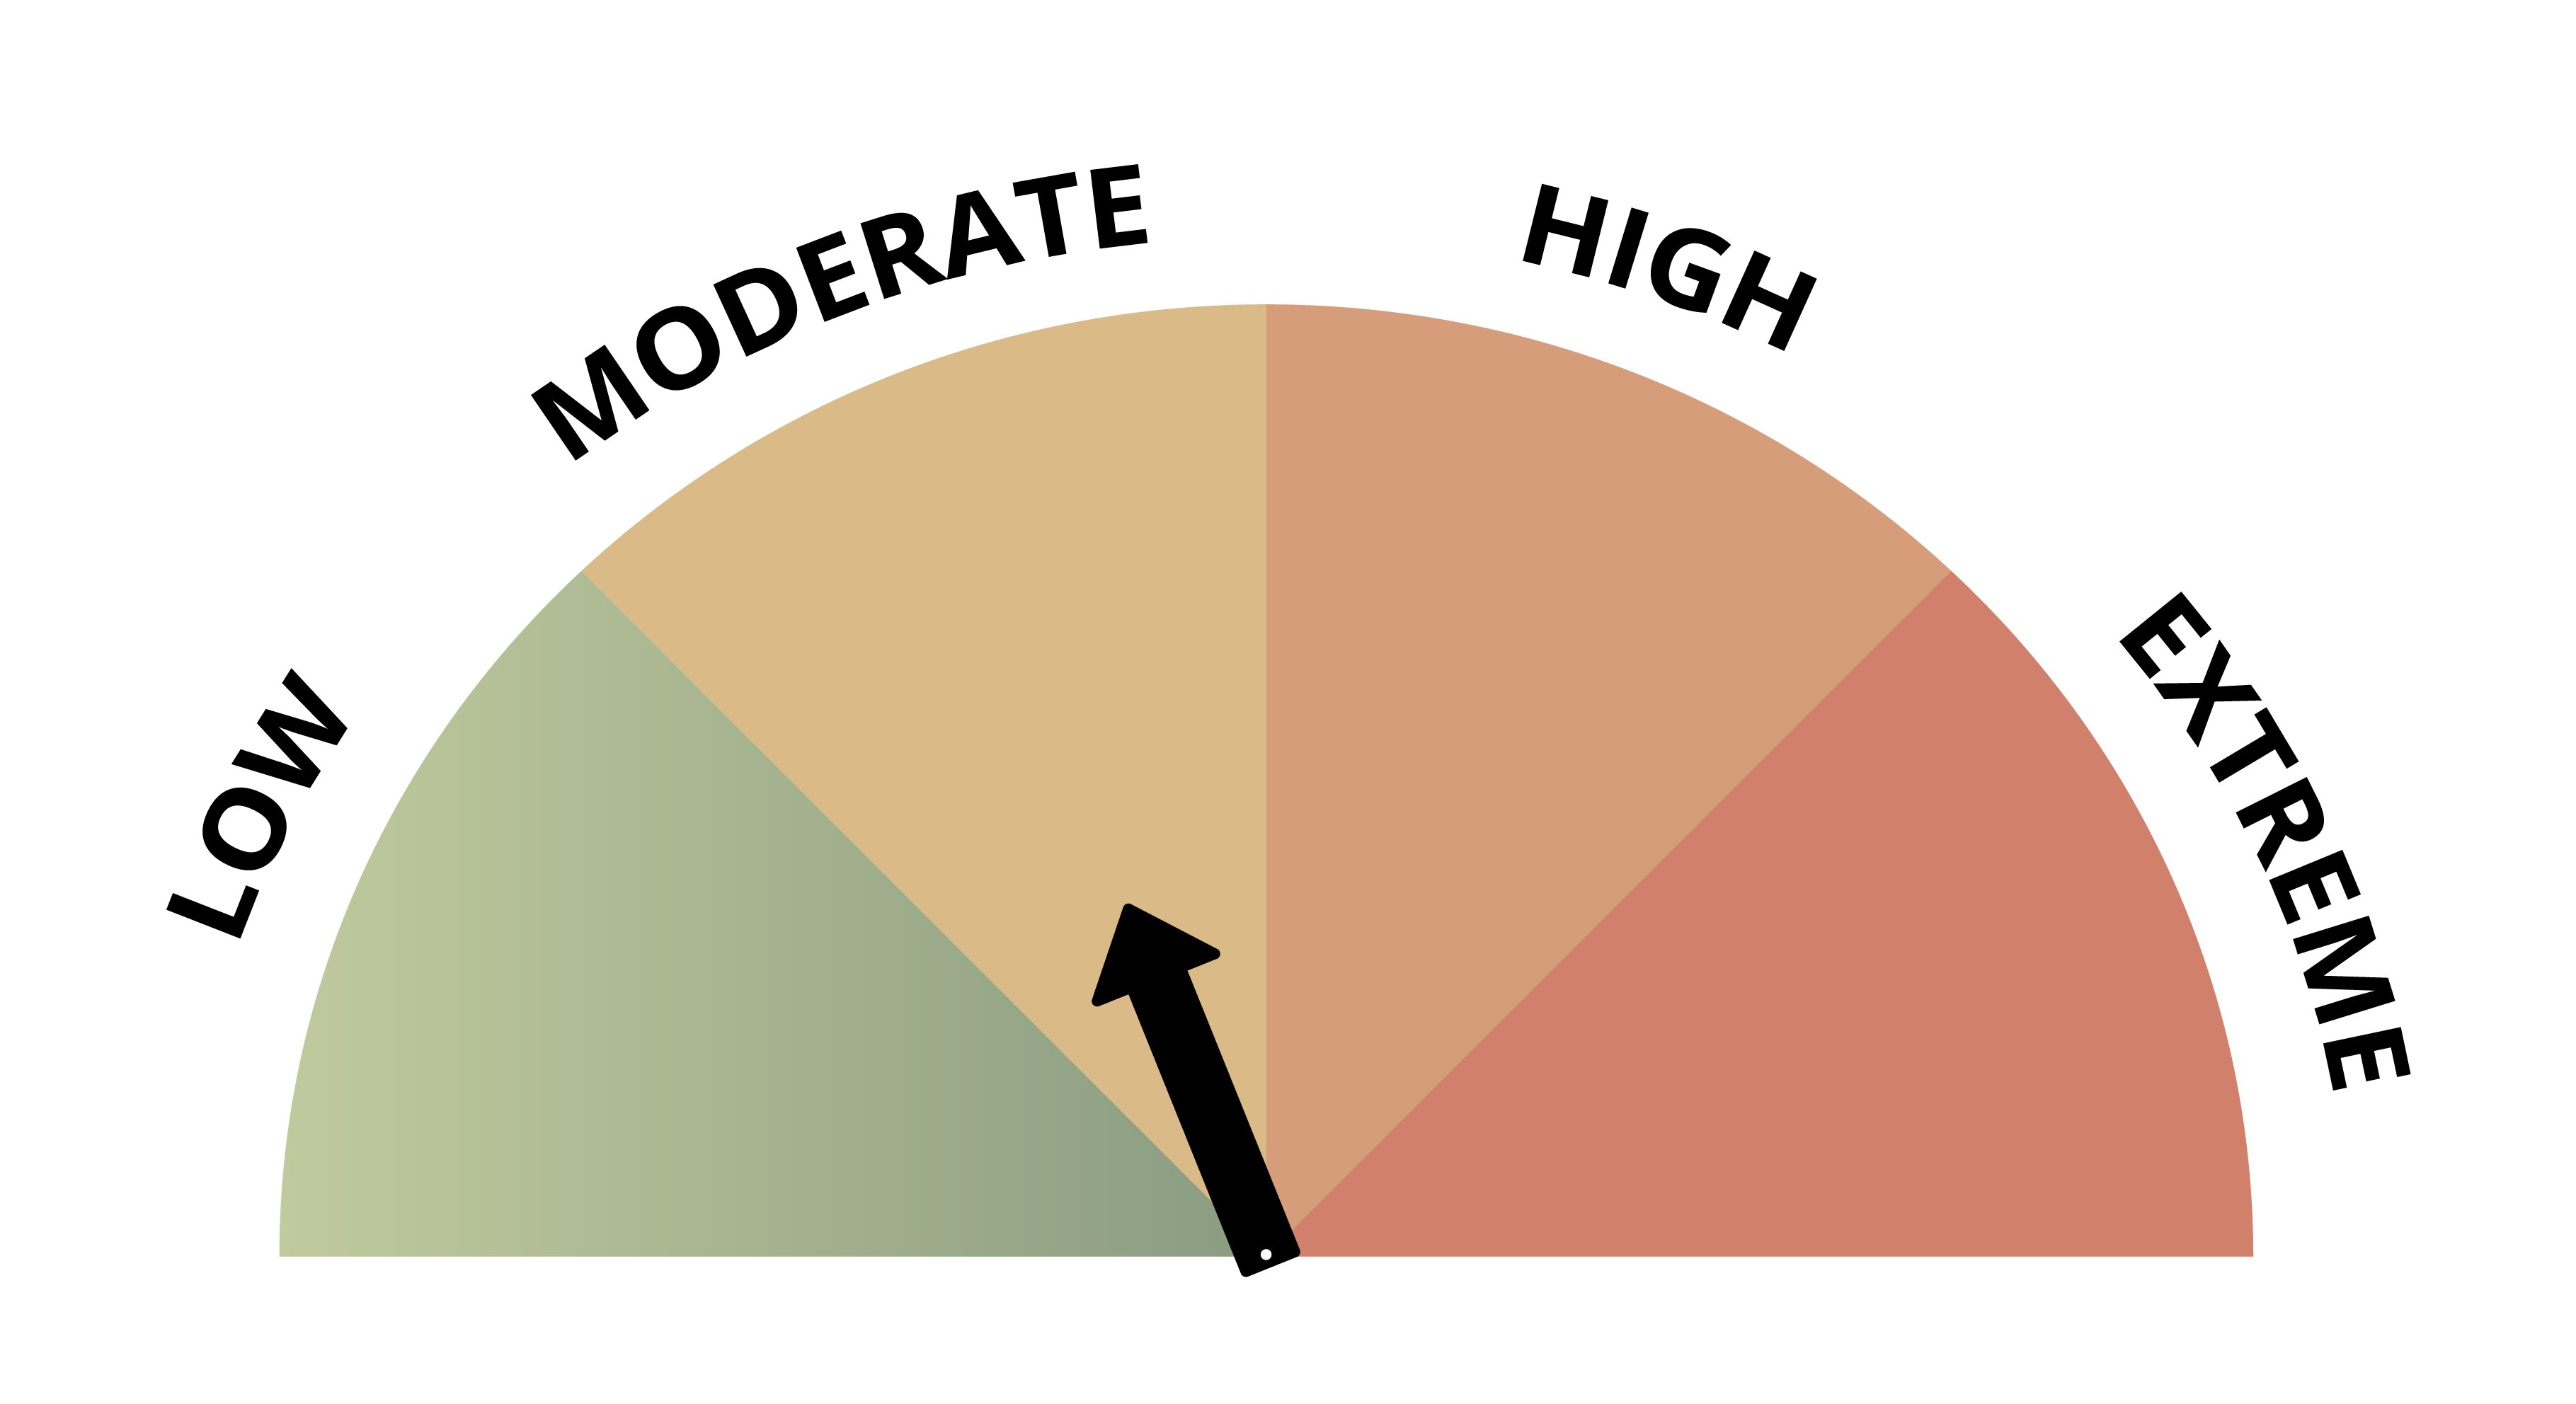 The Fire danger rating is moderate